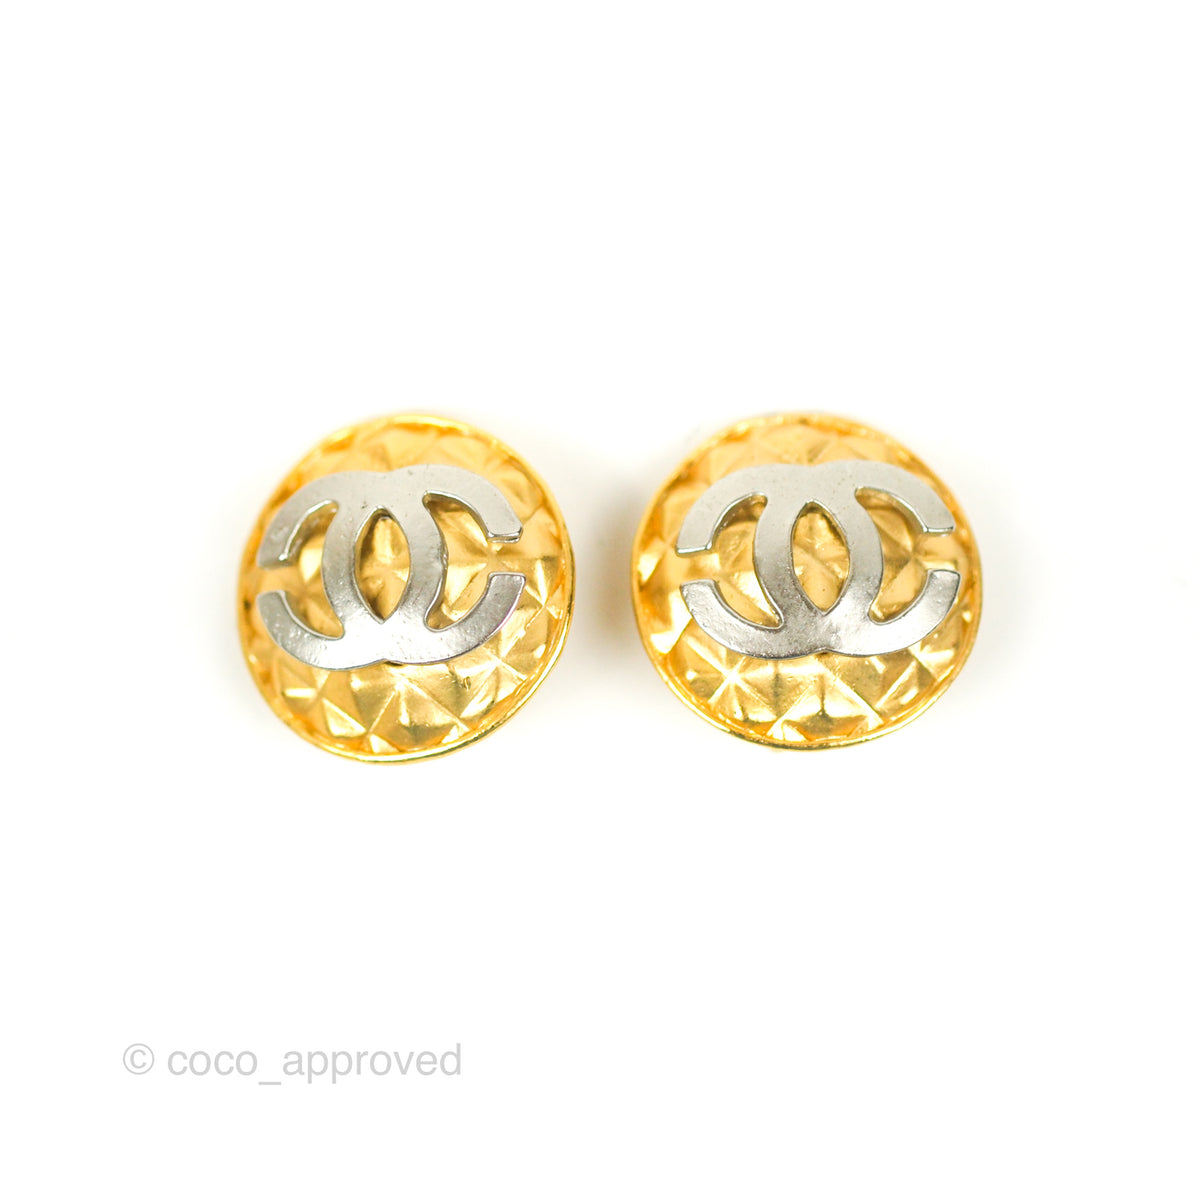 Sold at Auction: Vintage CHANEL CC Heart Clip-On Earrings